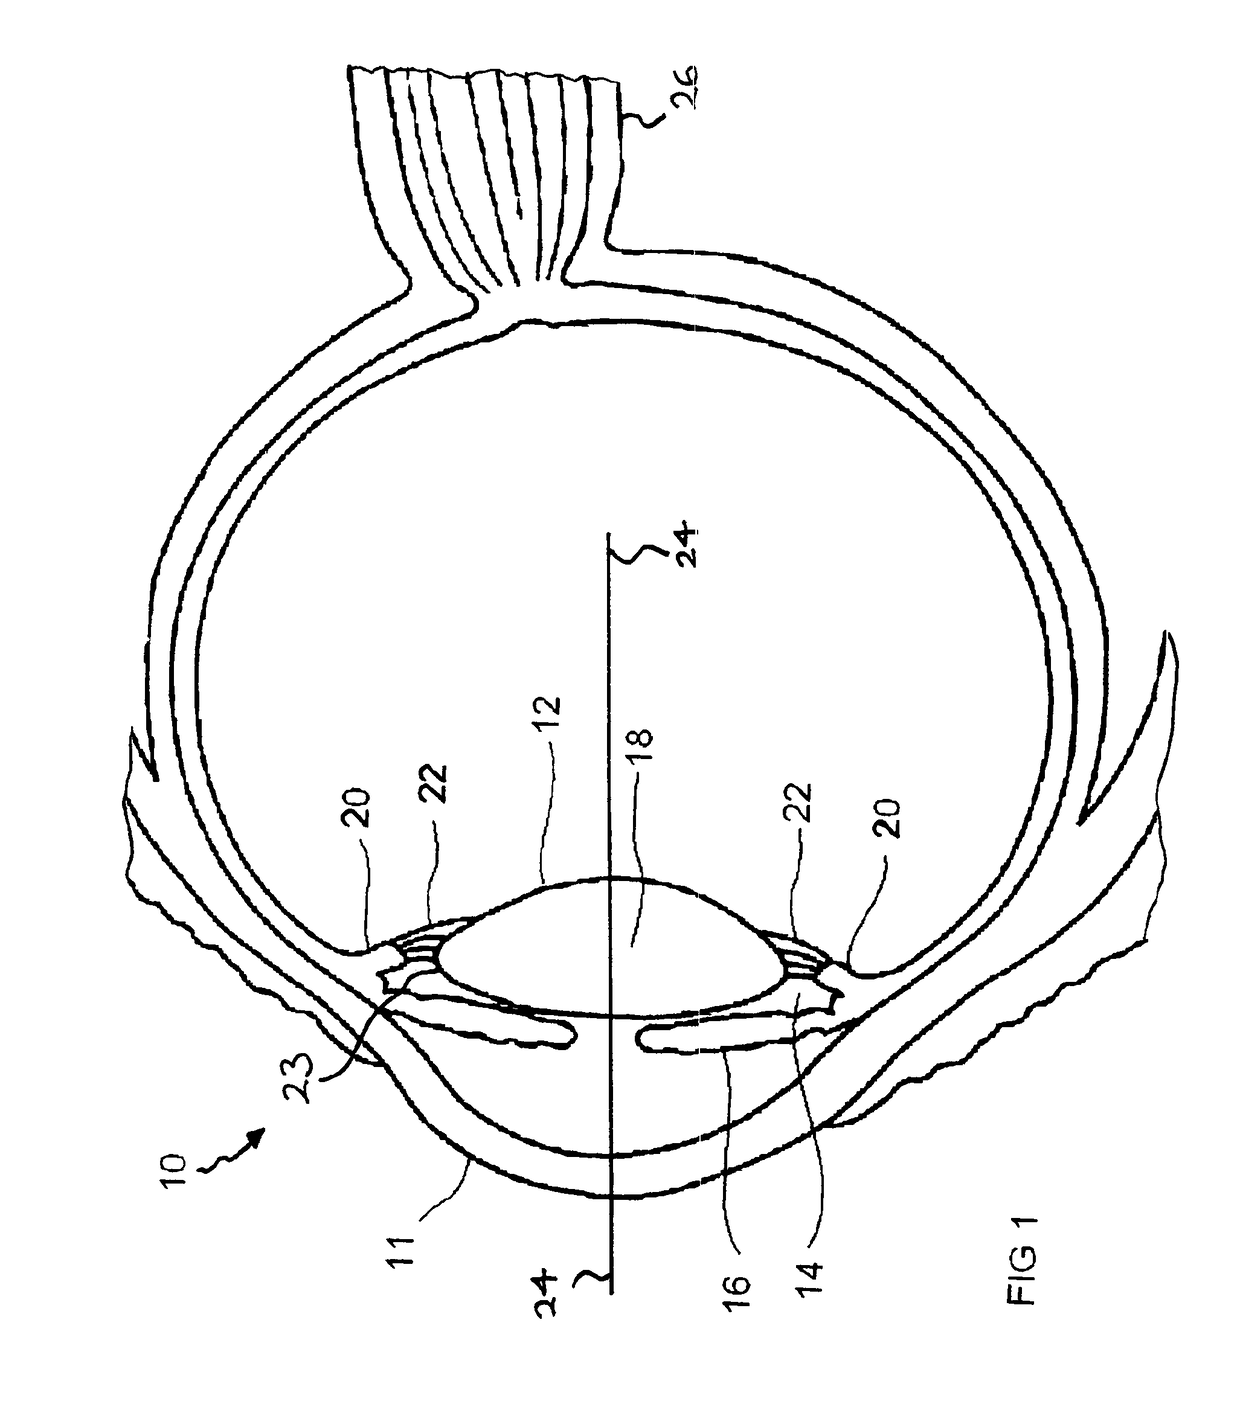 Accommodating intraocular lens systems and intraocular lens focusers